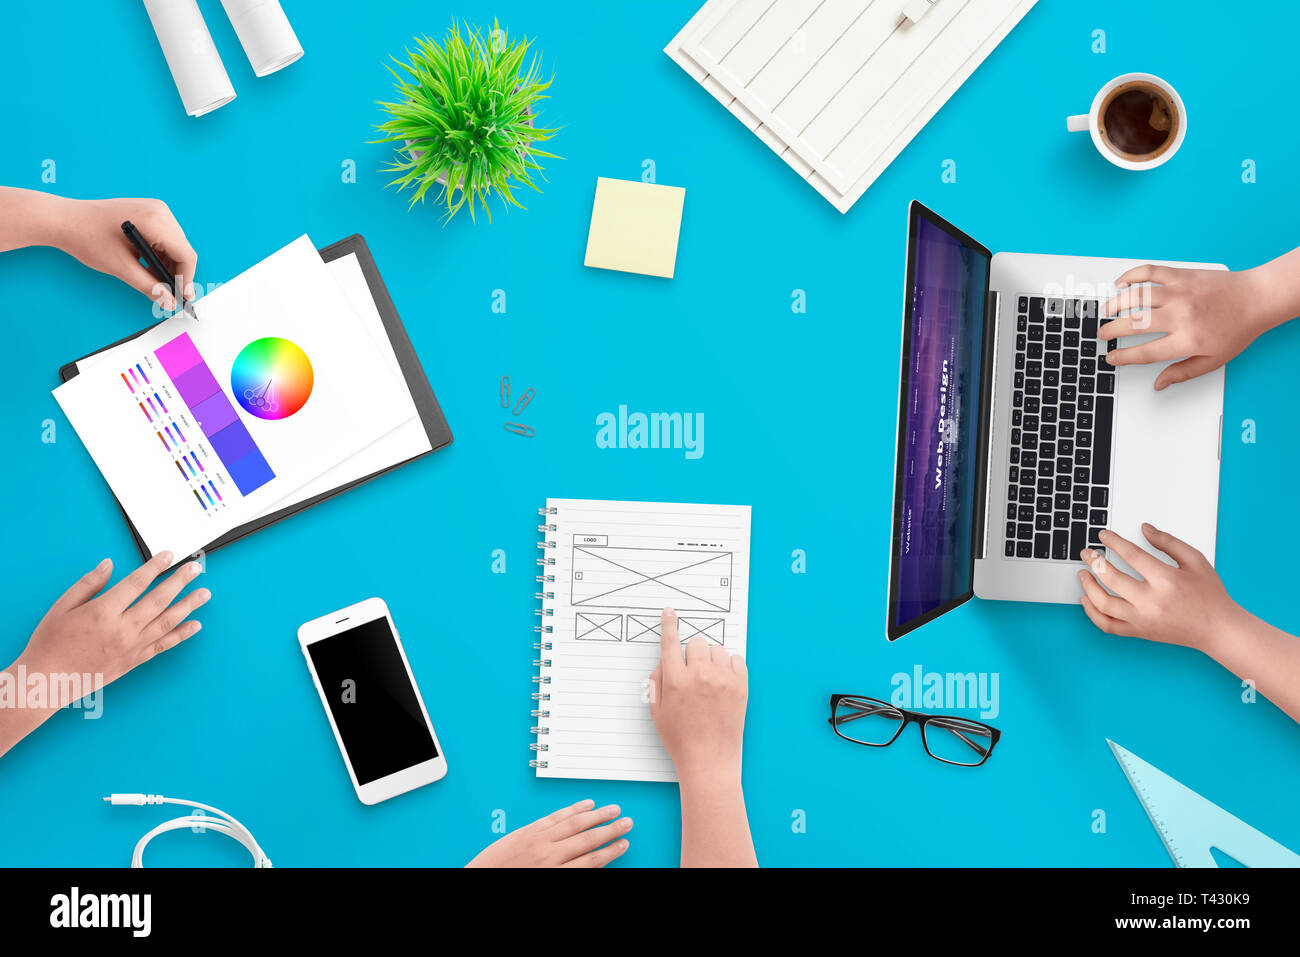 Development team work on user interface web project. Concept of work space. Top view scene. Stock Photo